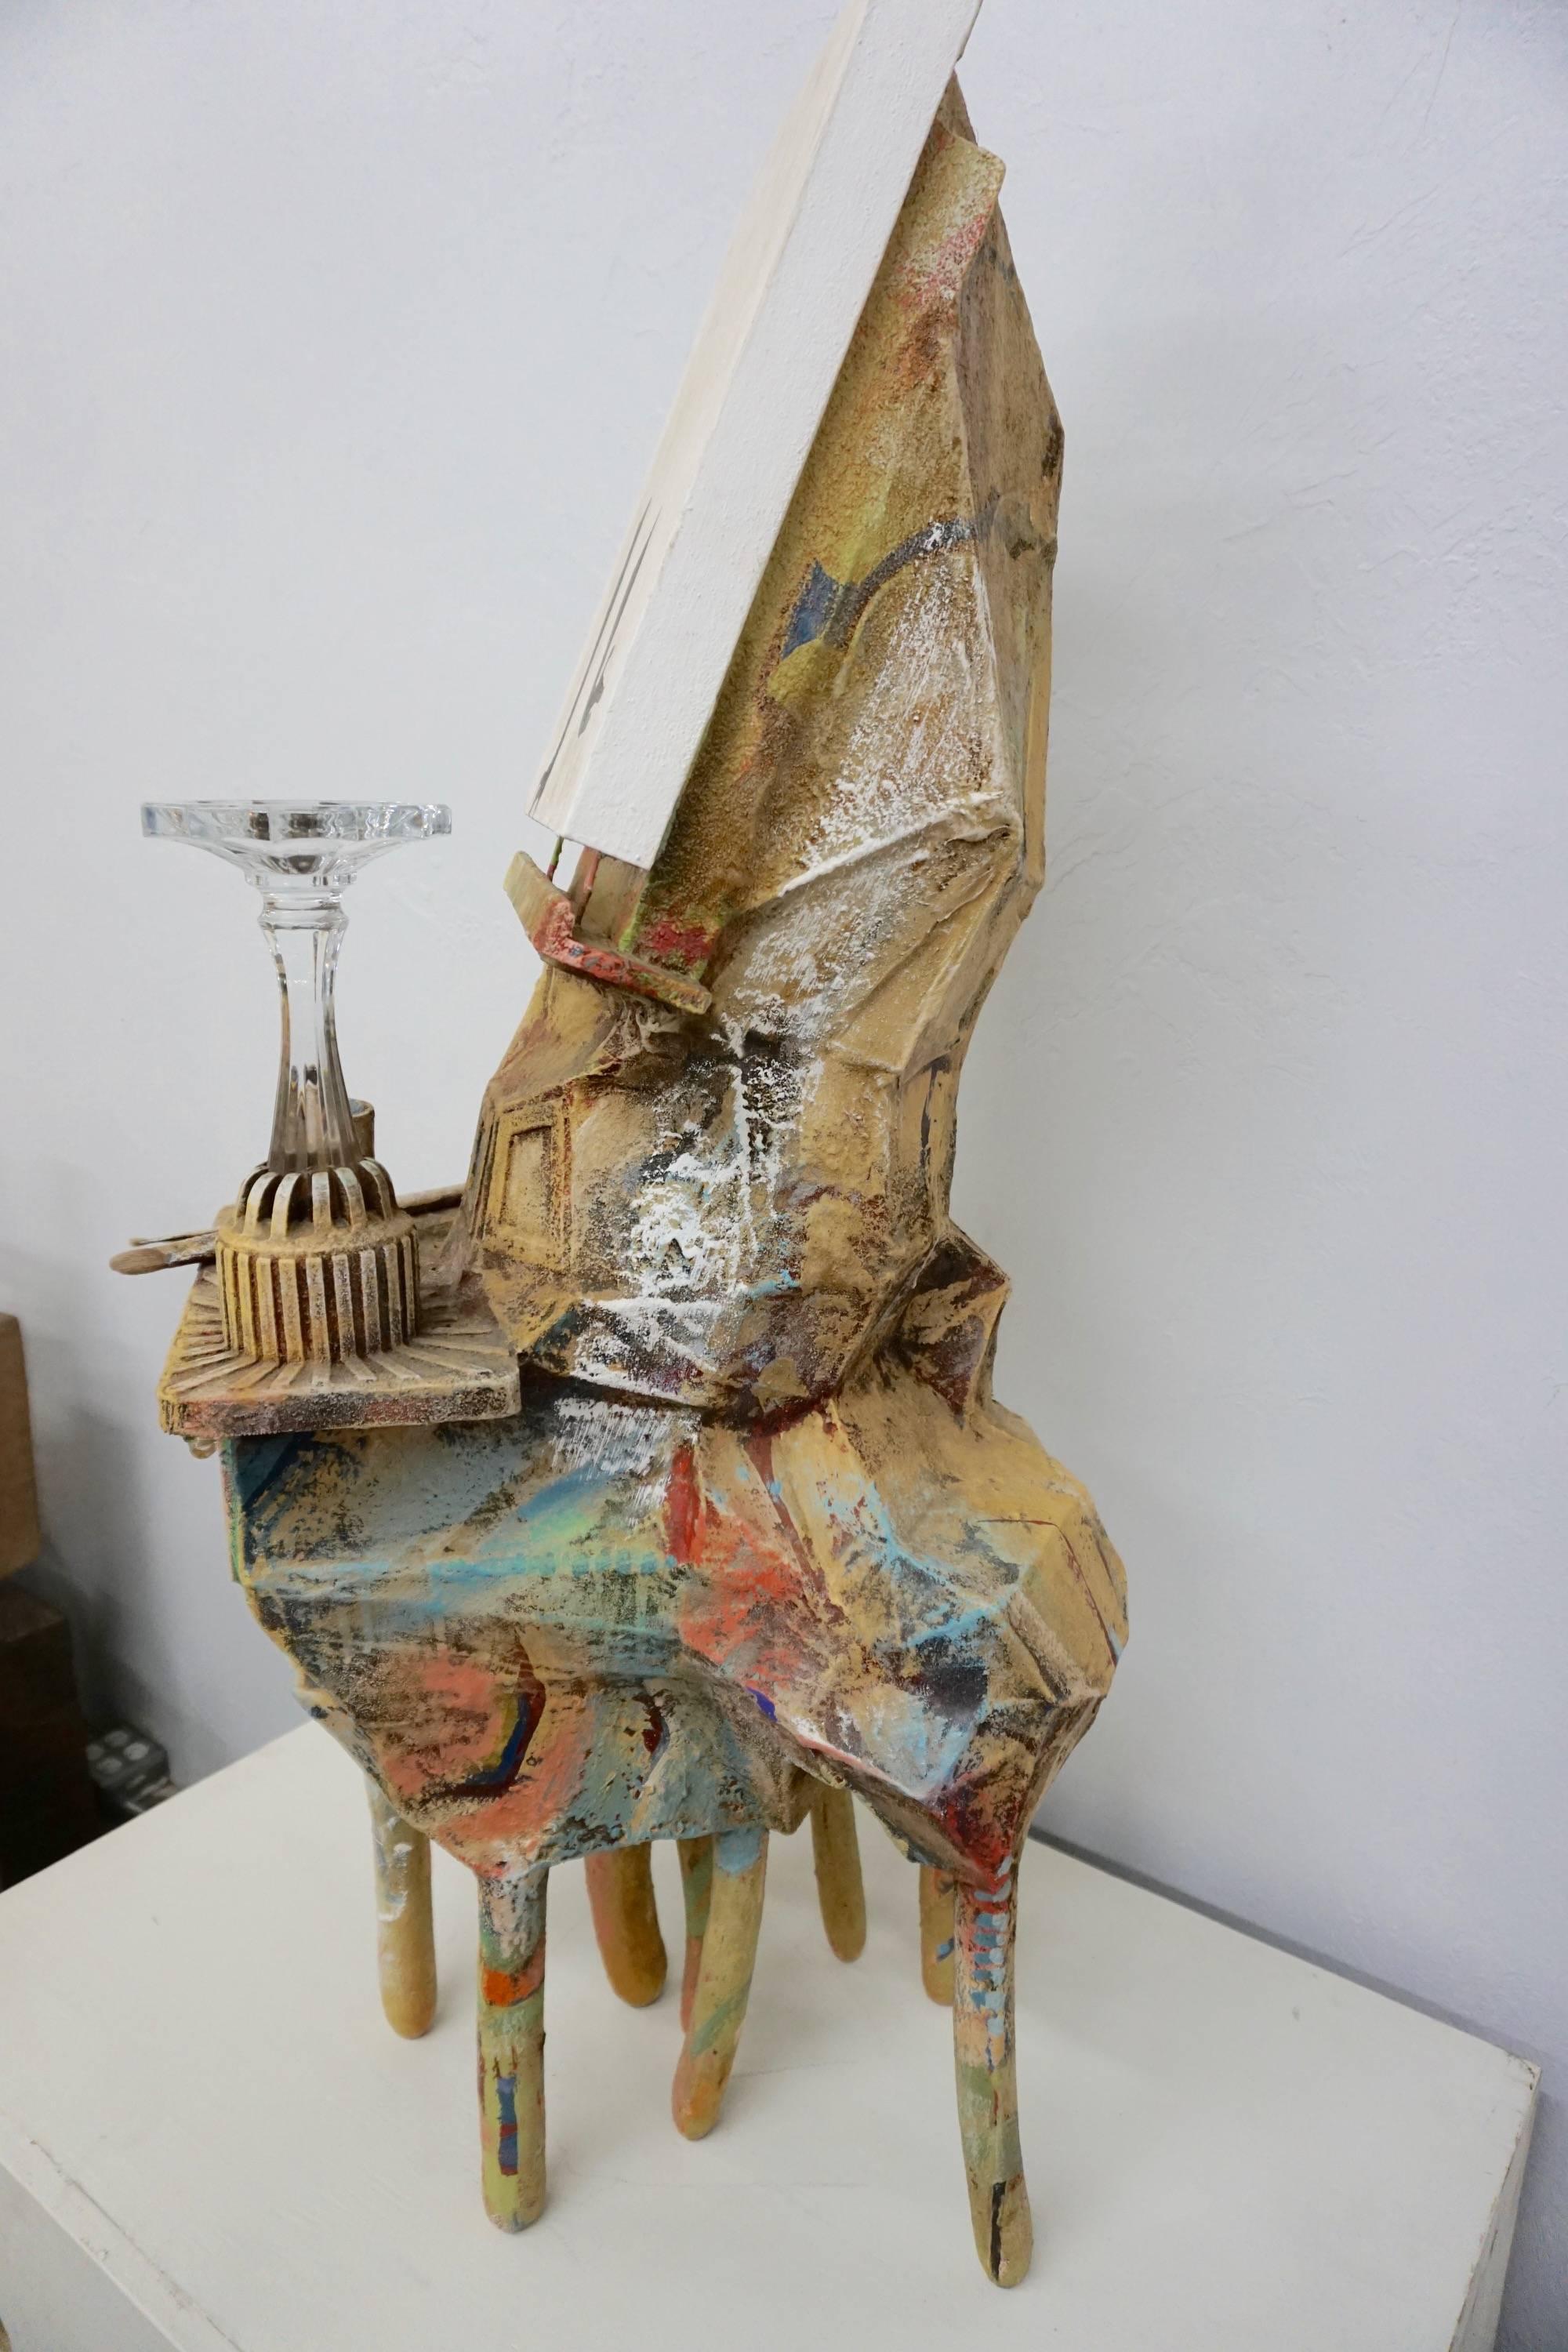 Found objects transformed into a unique work of art resembling an easel. Resin coated and spray painted, with artists tools, bones and a painted canvas as part of the assemblage.